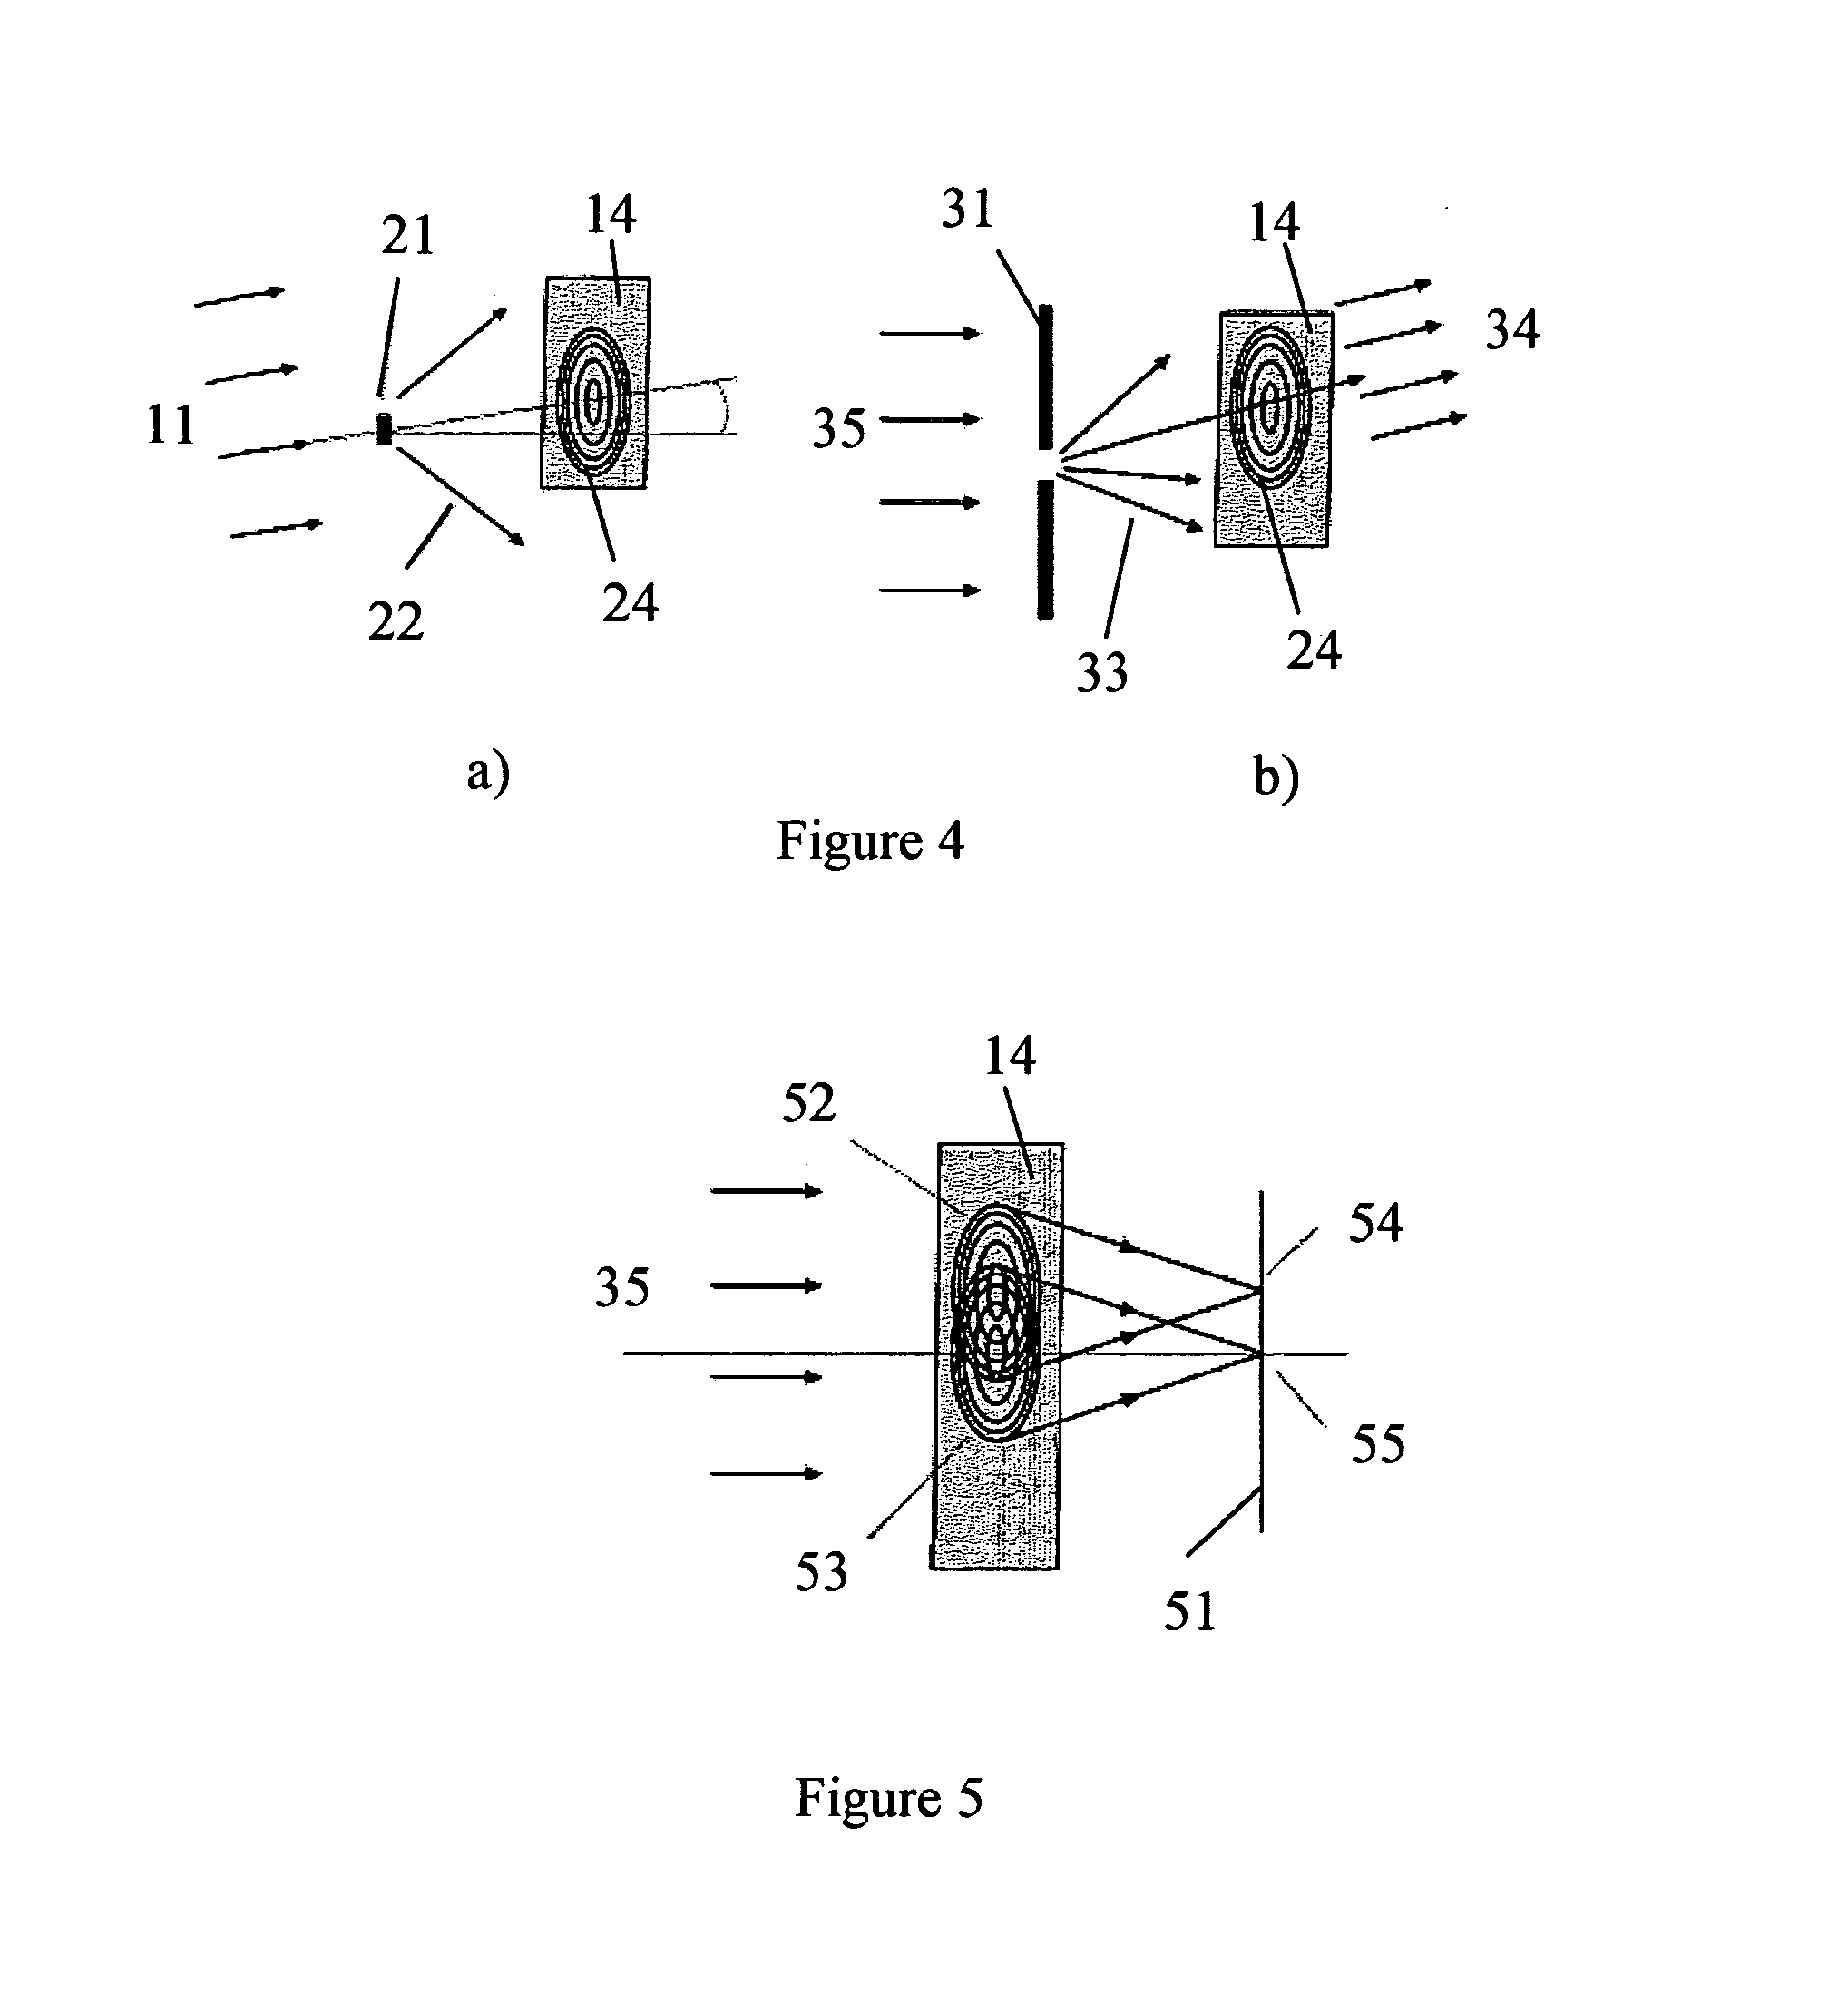 Holography-based device, system and method for coded aperture imaging